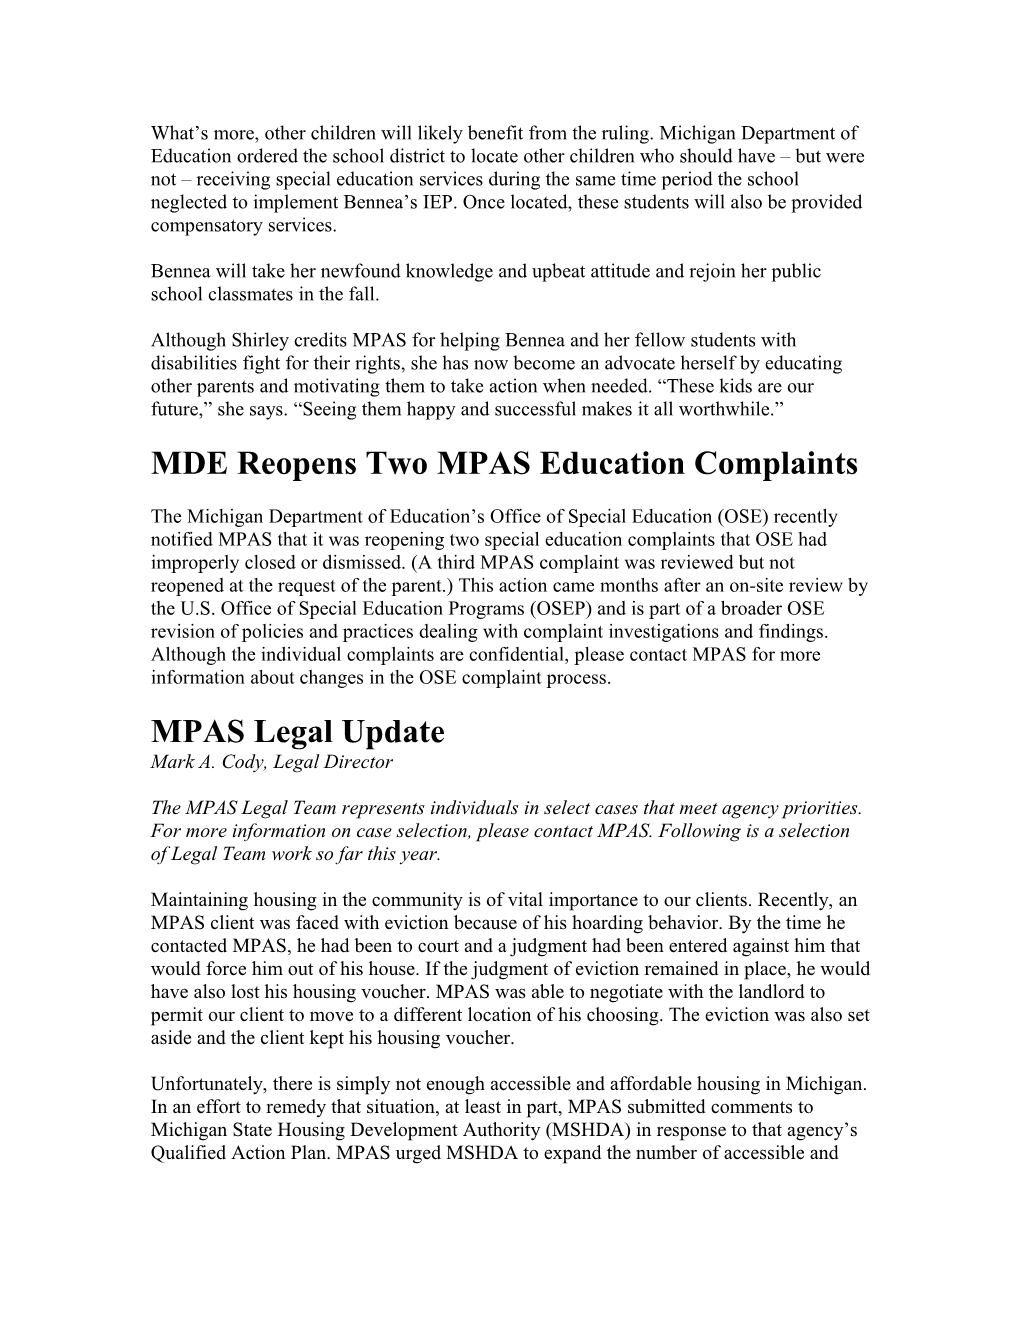 A Quarterly Newsletter of Michigan Protection and Advocacy Service, Inc. (MPAS)